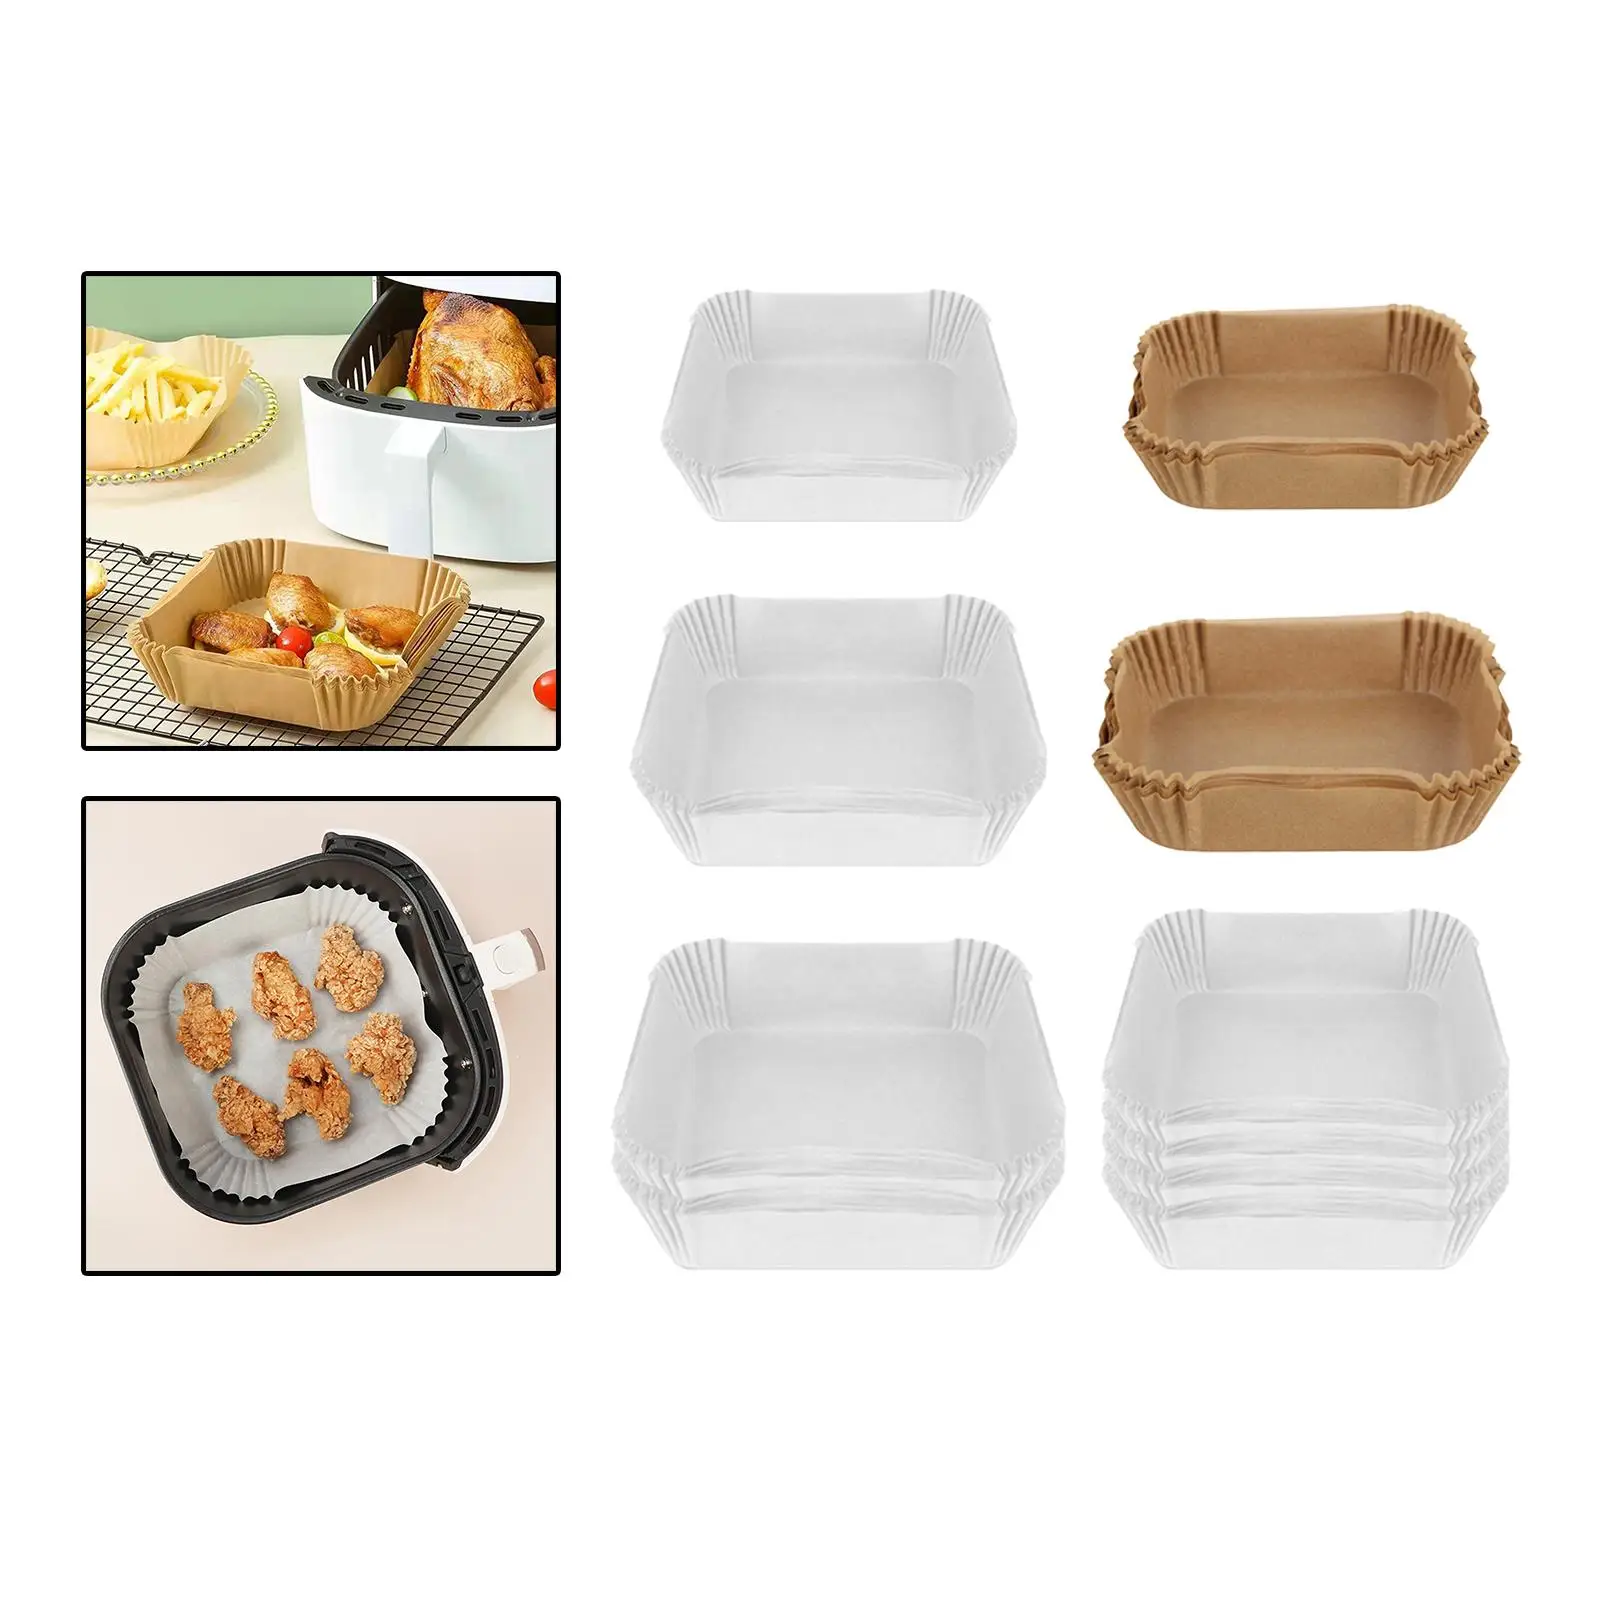 Air Fryer Disposable Paper Liners Non Stick Liner Square Baking Paper for Grilling Microwave Fast Food Restaurant Kitchen Hotel